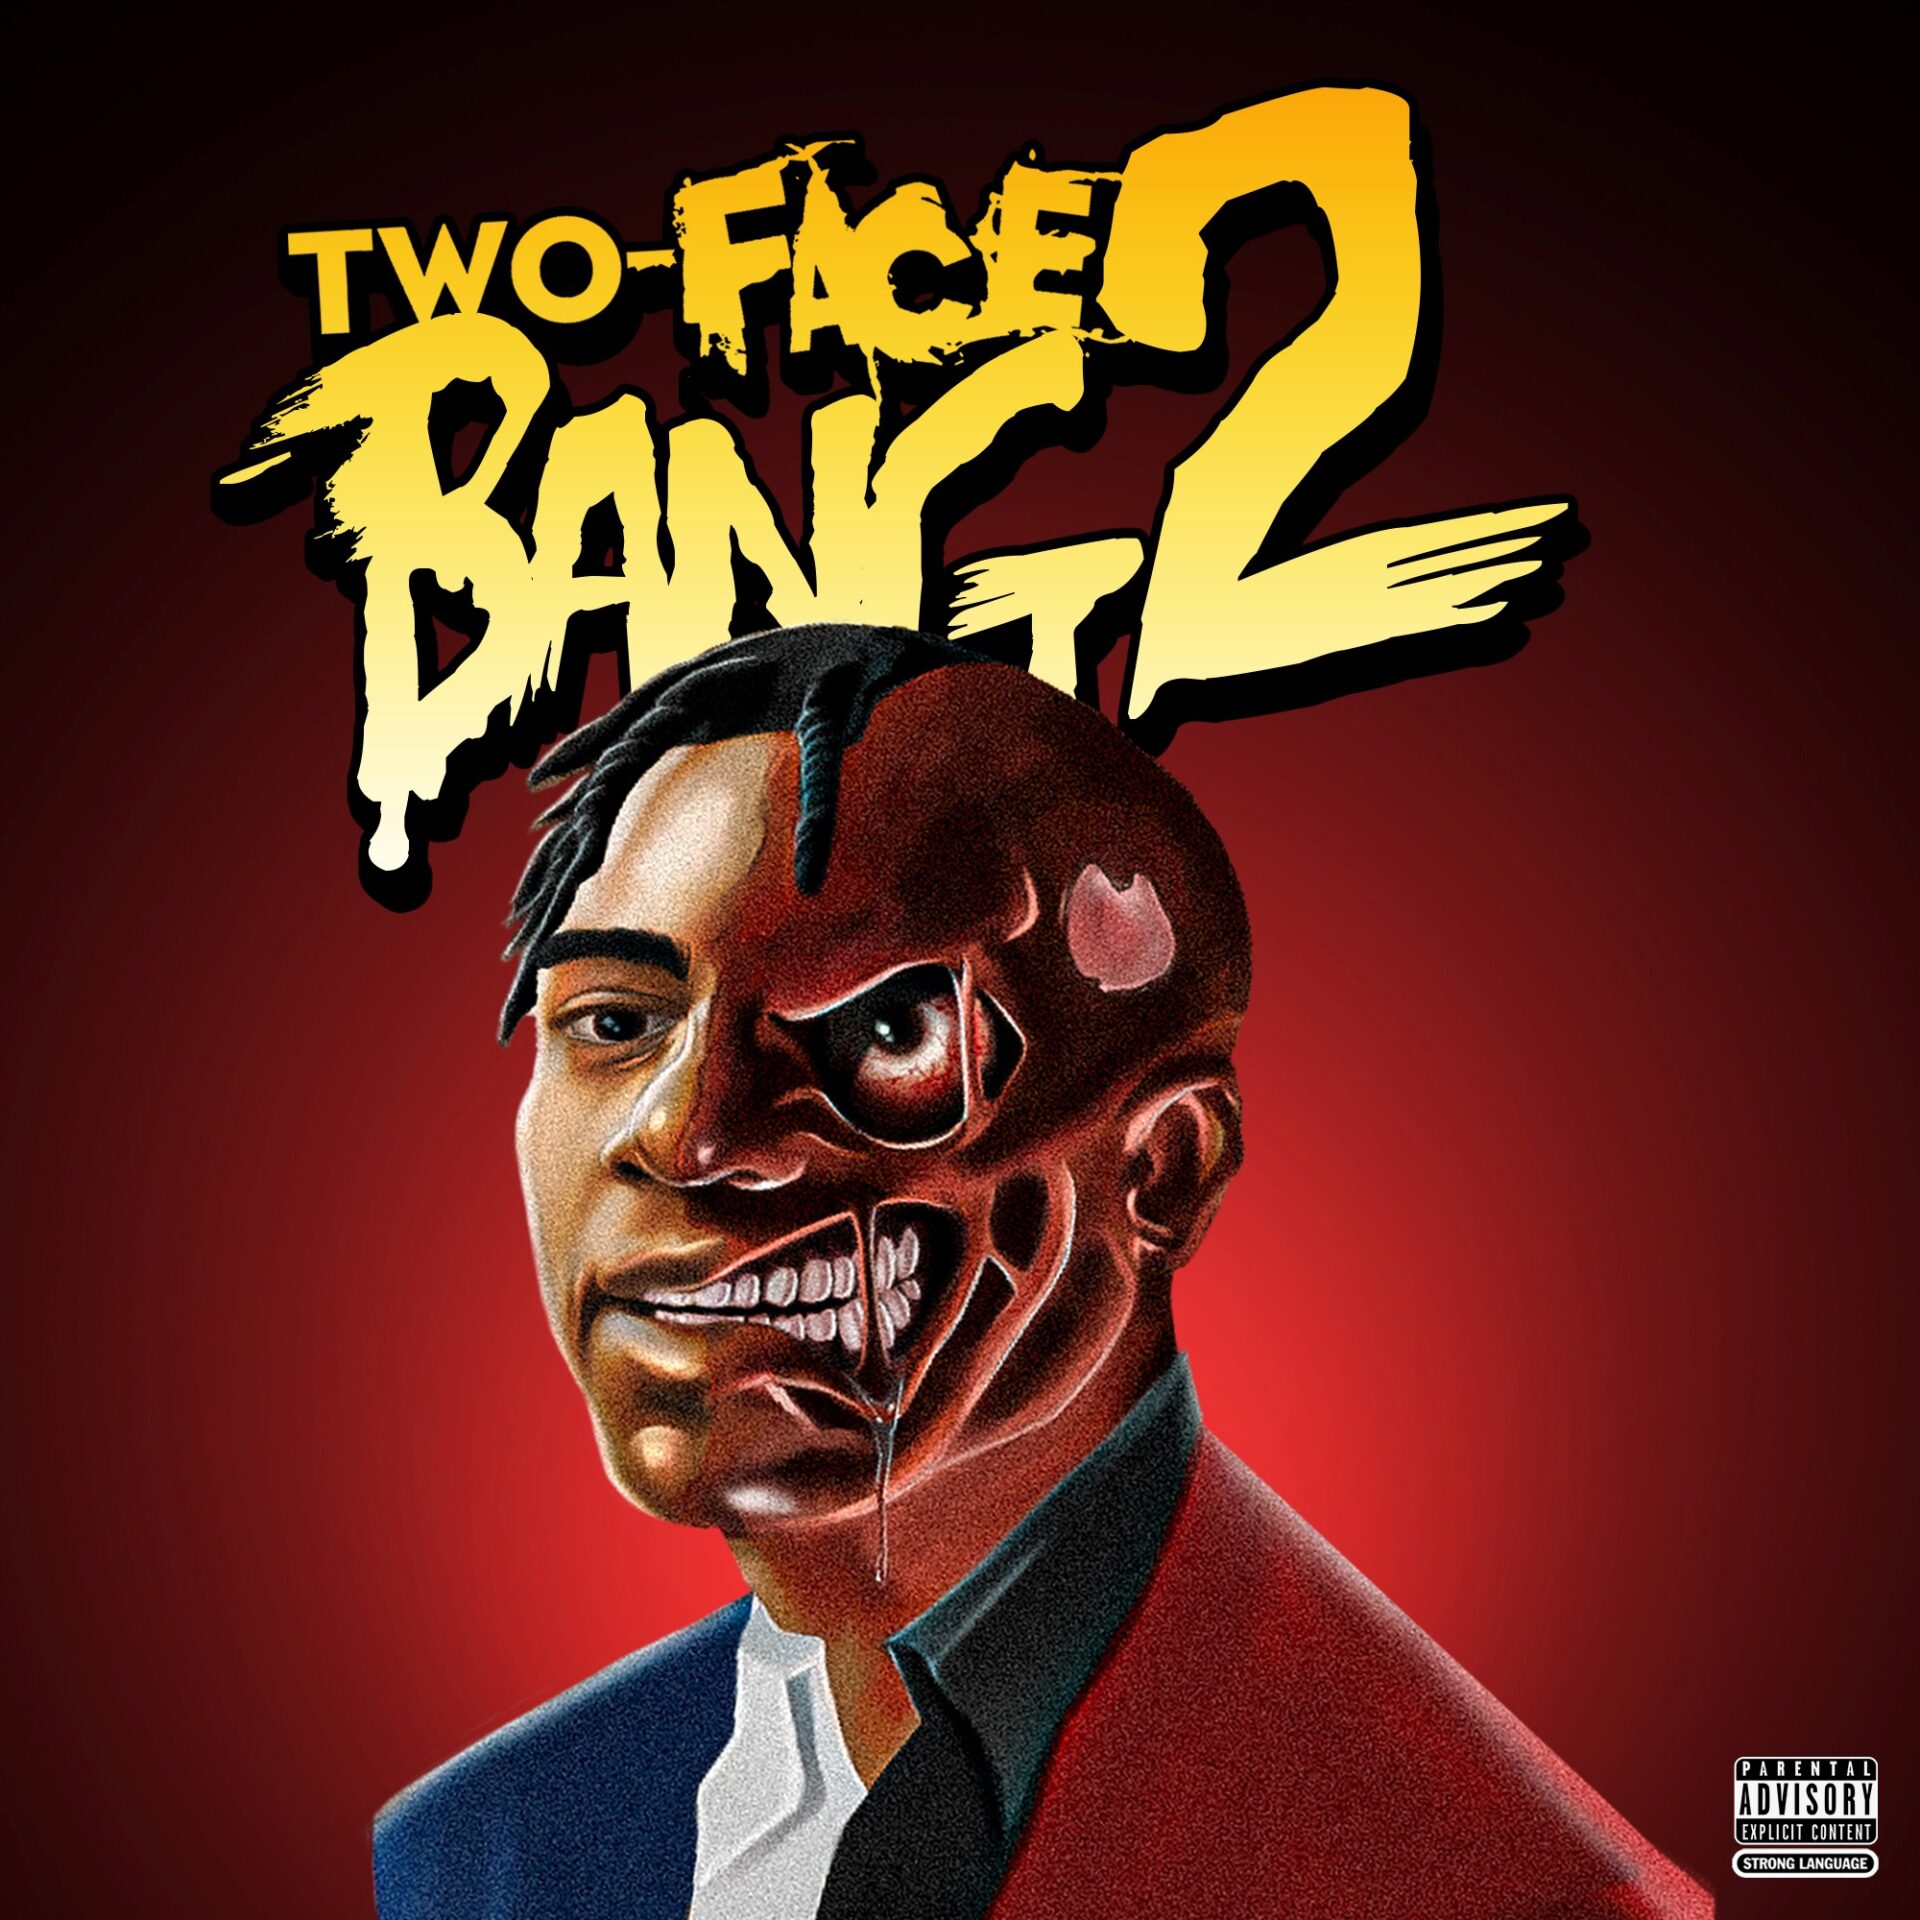 Fredo Bang Drops Two-Face Bang 2, His Seventh Mixtape, Yours Truly, News, August 8, 2022